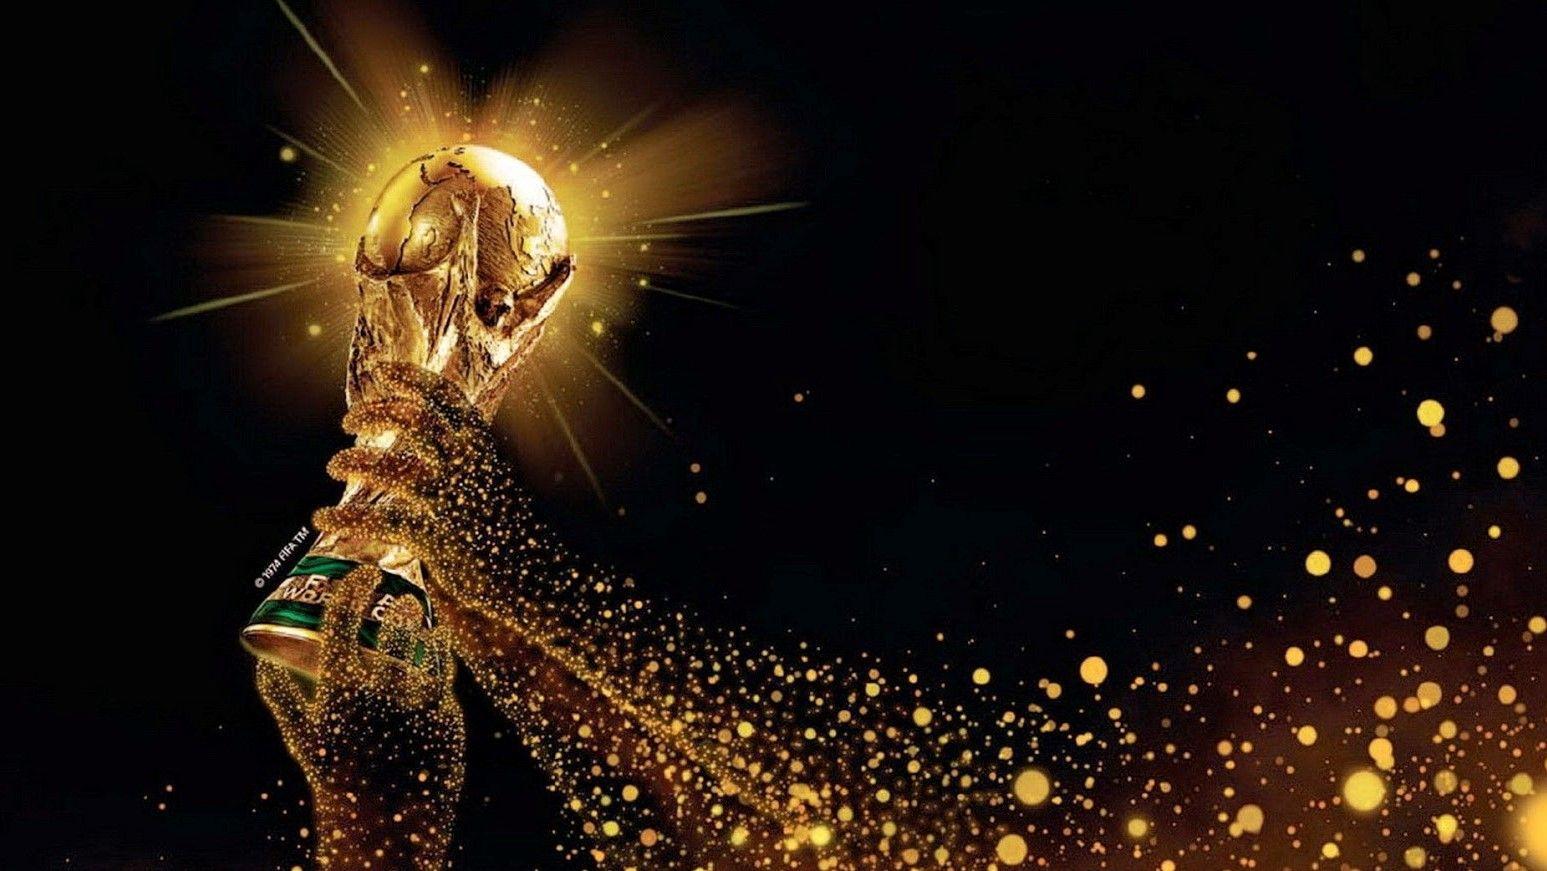 FIFA Worldcup 2018 HD Wallpaper And Image Download Free